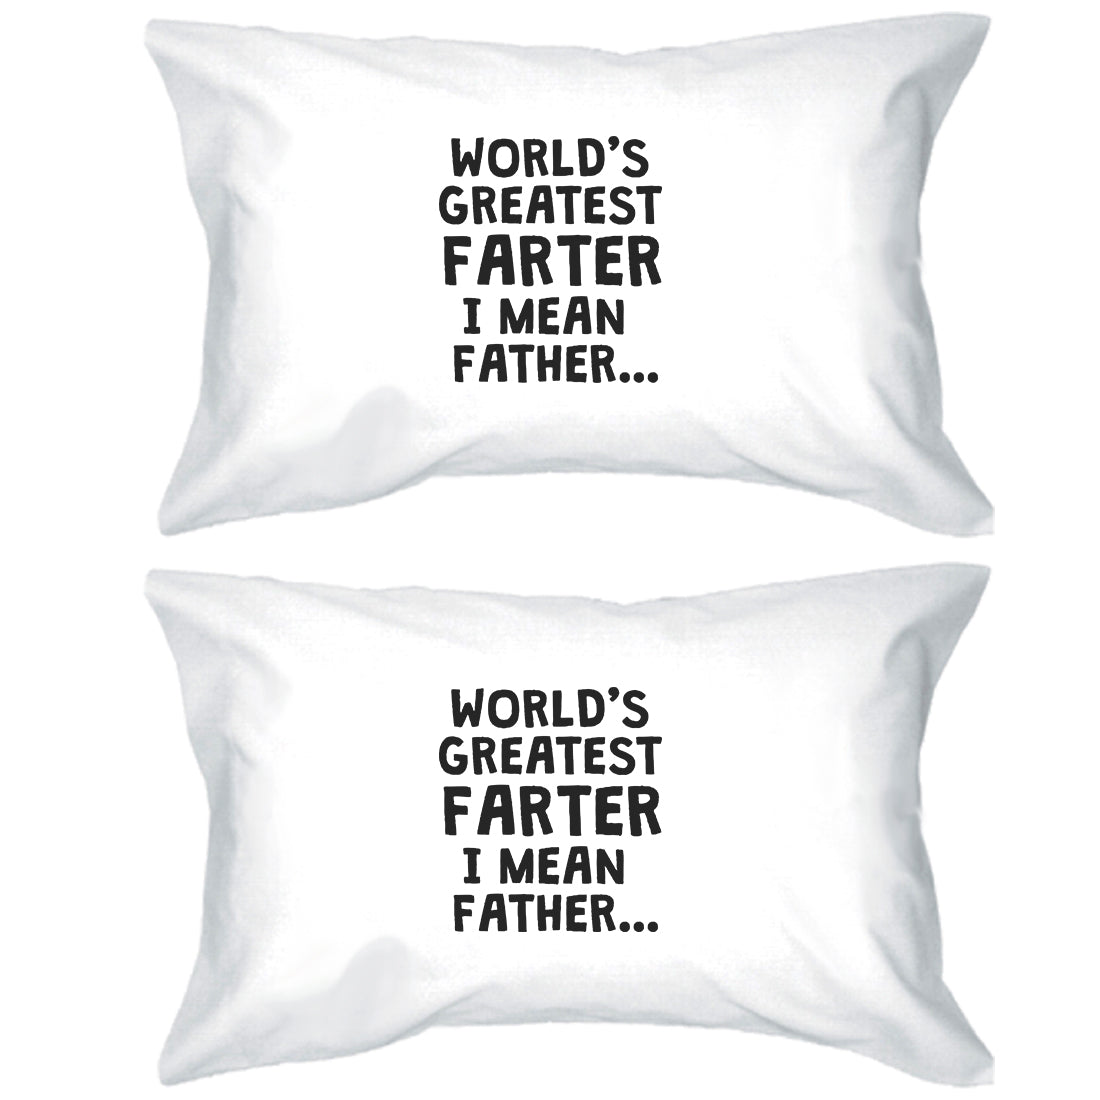 Farter I Mean Father Pillowcases Standard Size Funny Pillow Covers White